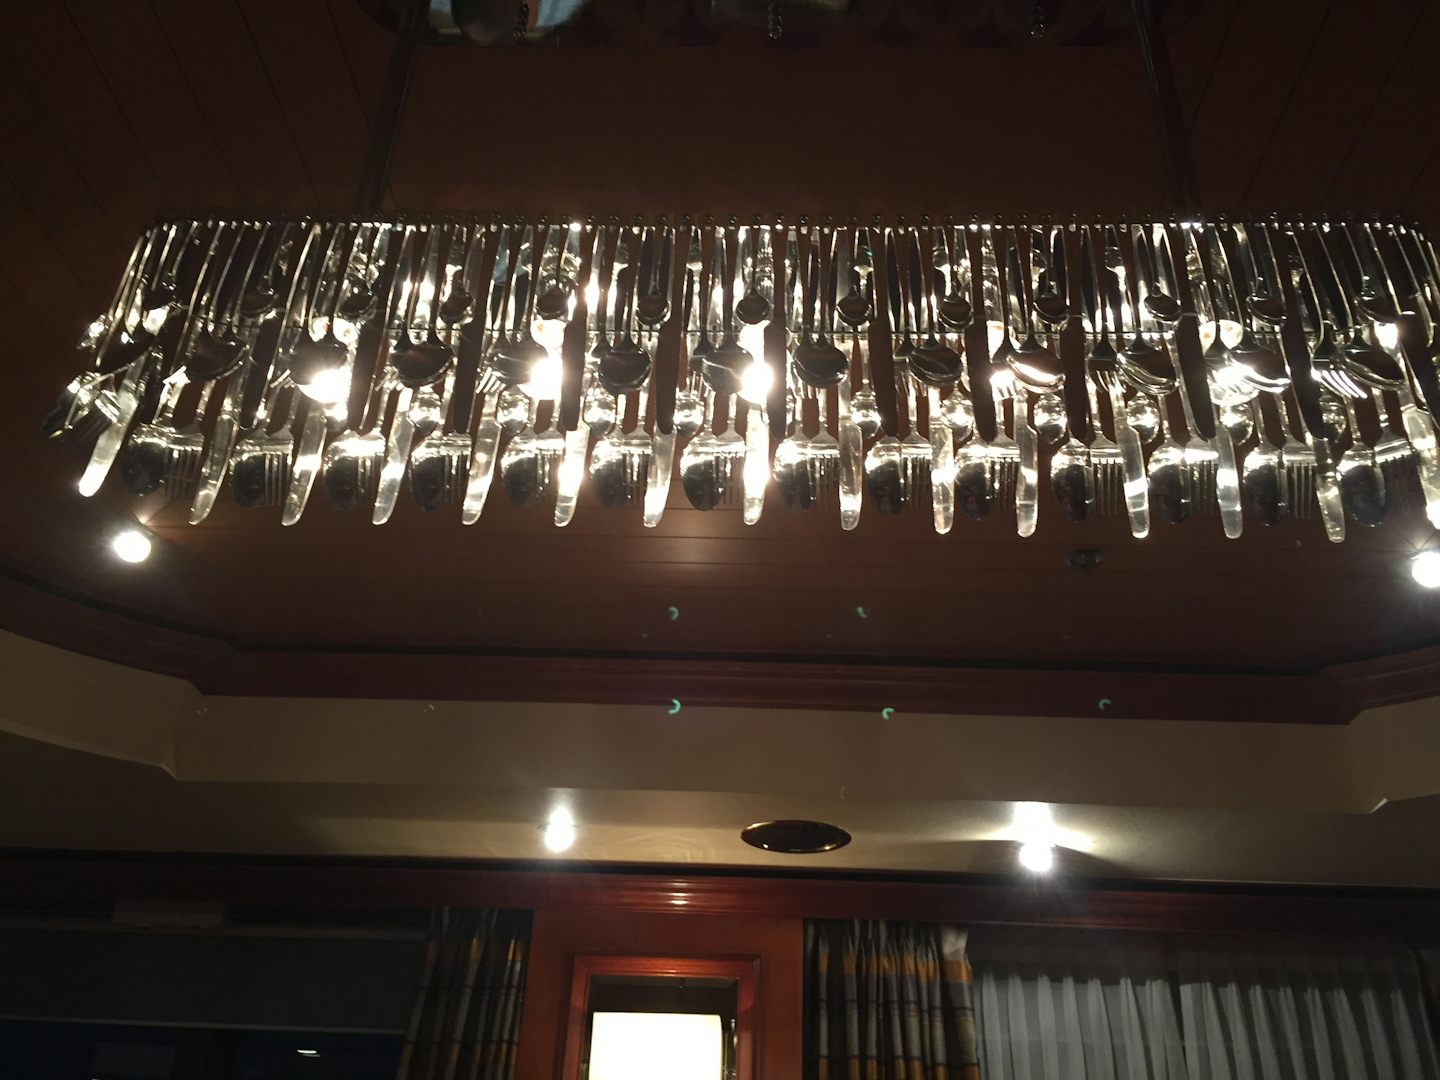 Chandelier located in dining room for chefs table. It